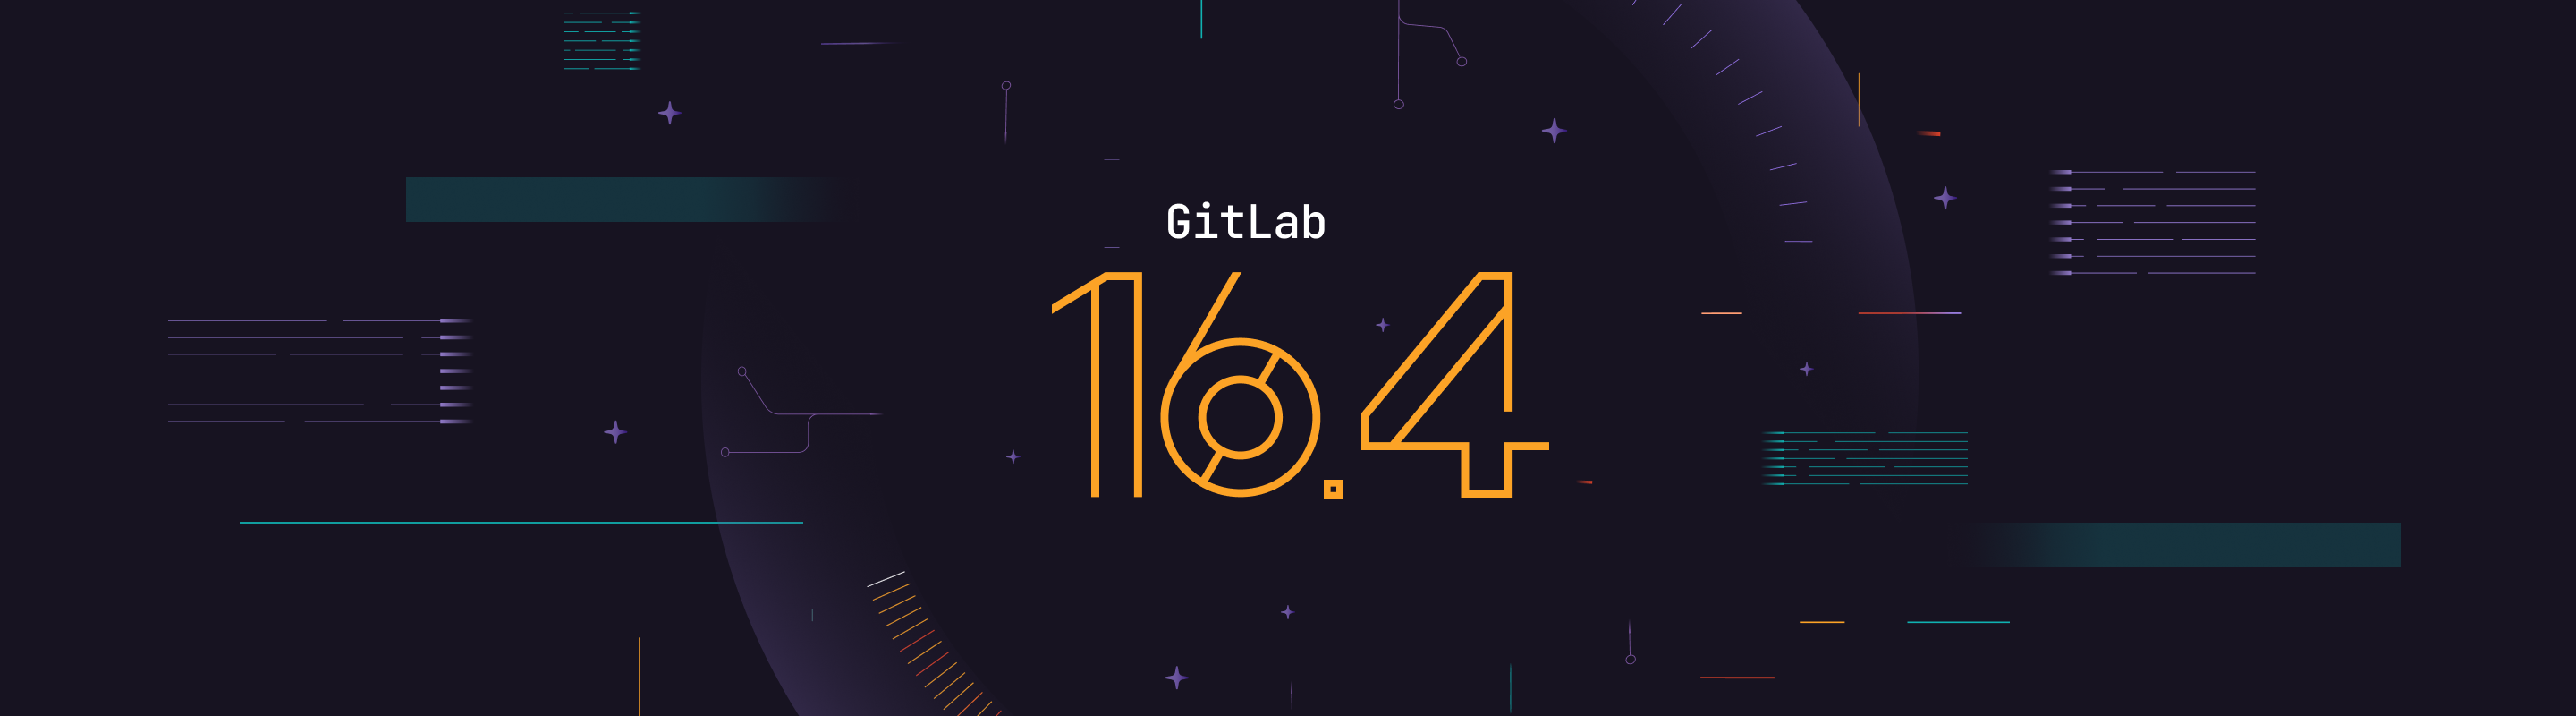 GitLab 16.4 released with customizable roles and group-level dependency list